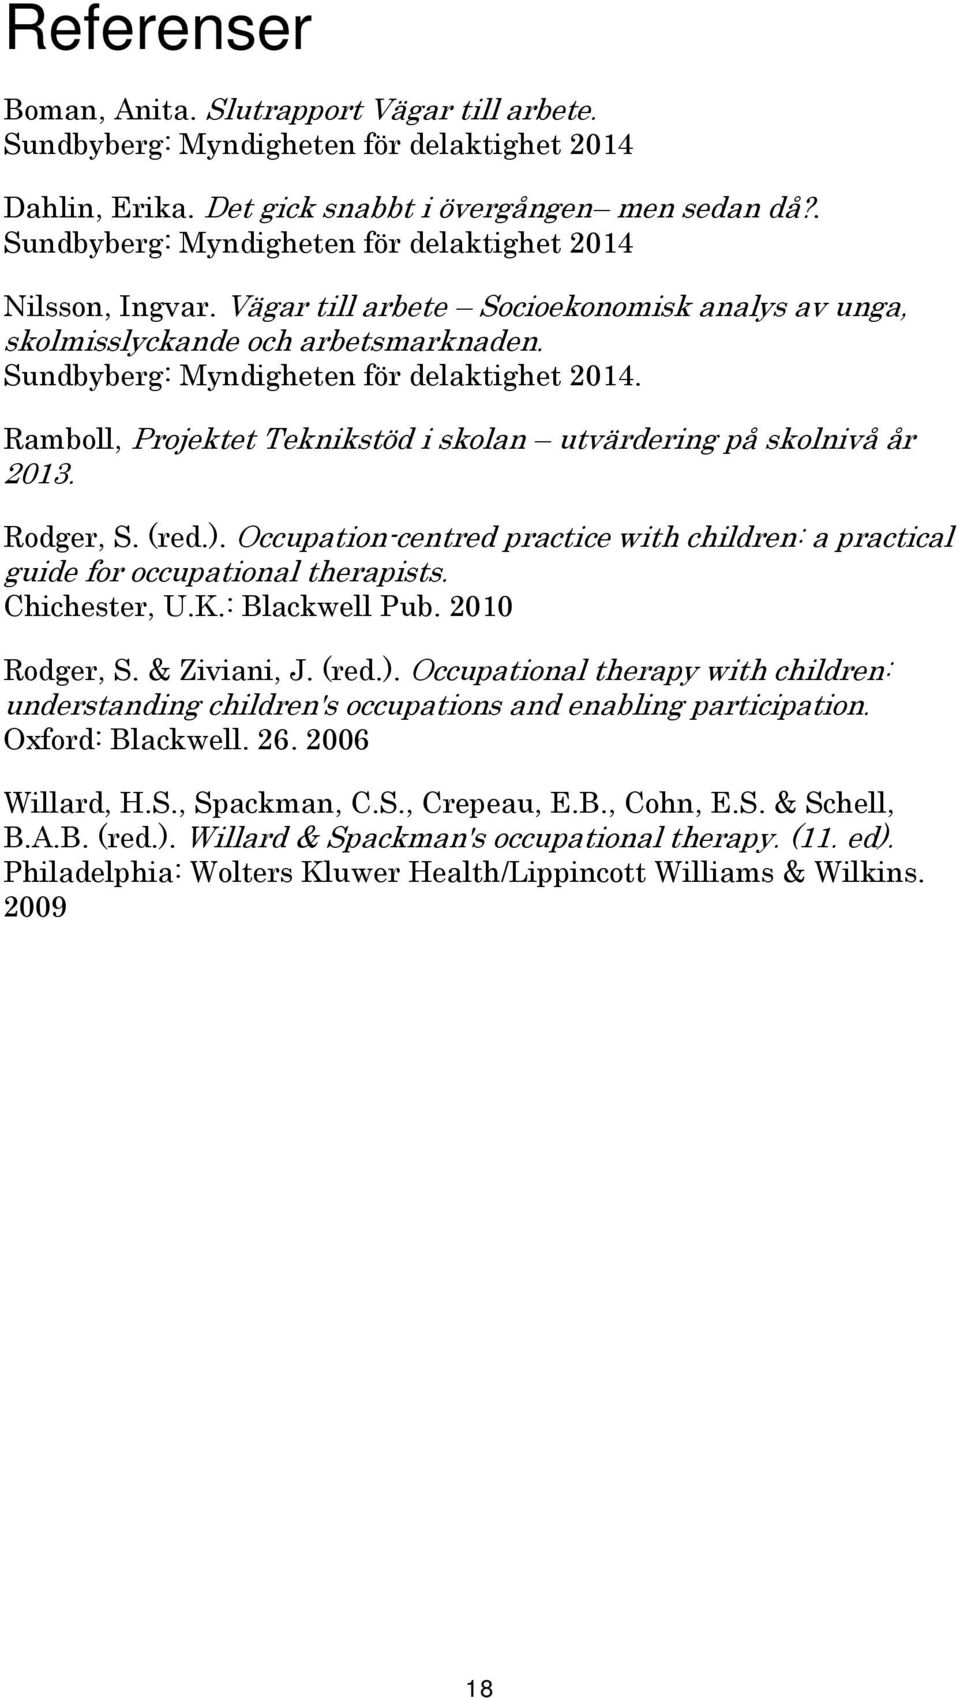 Rodger, S. (red.). Occupation-centred practice with children: a practical guide for occupational therapists. Chichester, U.K.: Blackwell Pub. 2010 Rodger, S. & Ziviani, J. (red.). Occupational therapy with children: understanding children's occupations and enabling participation.